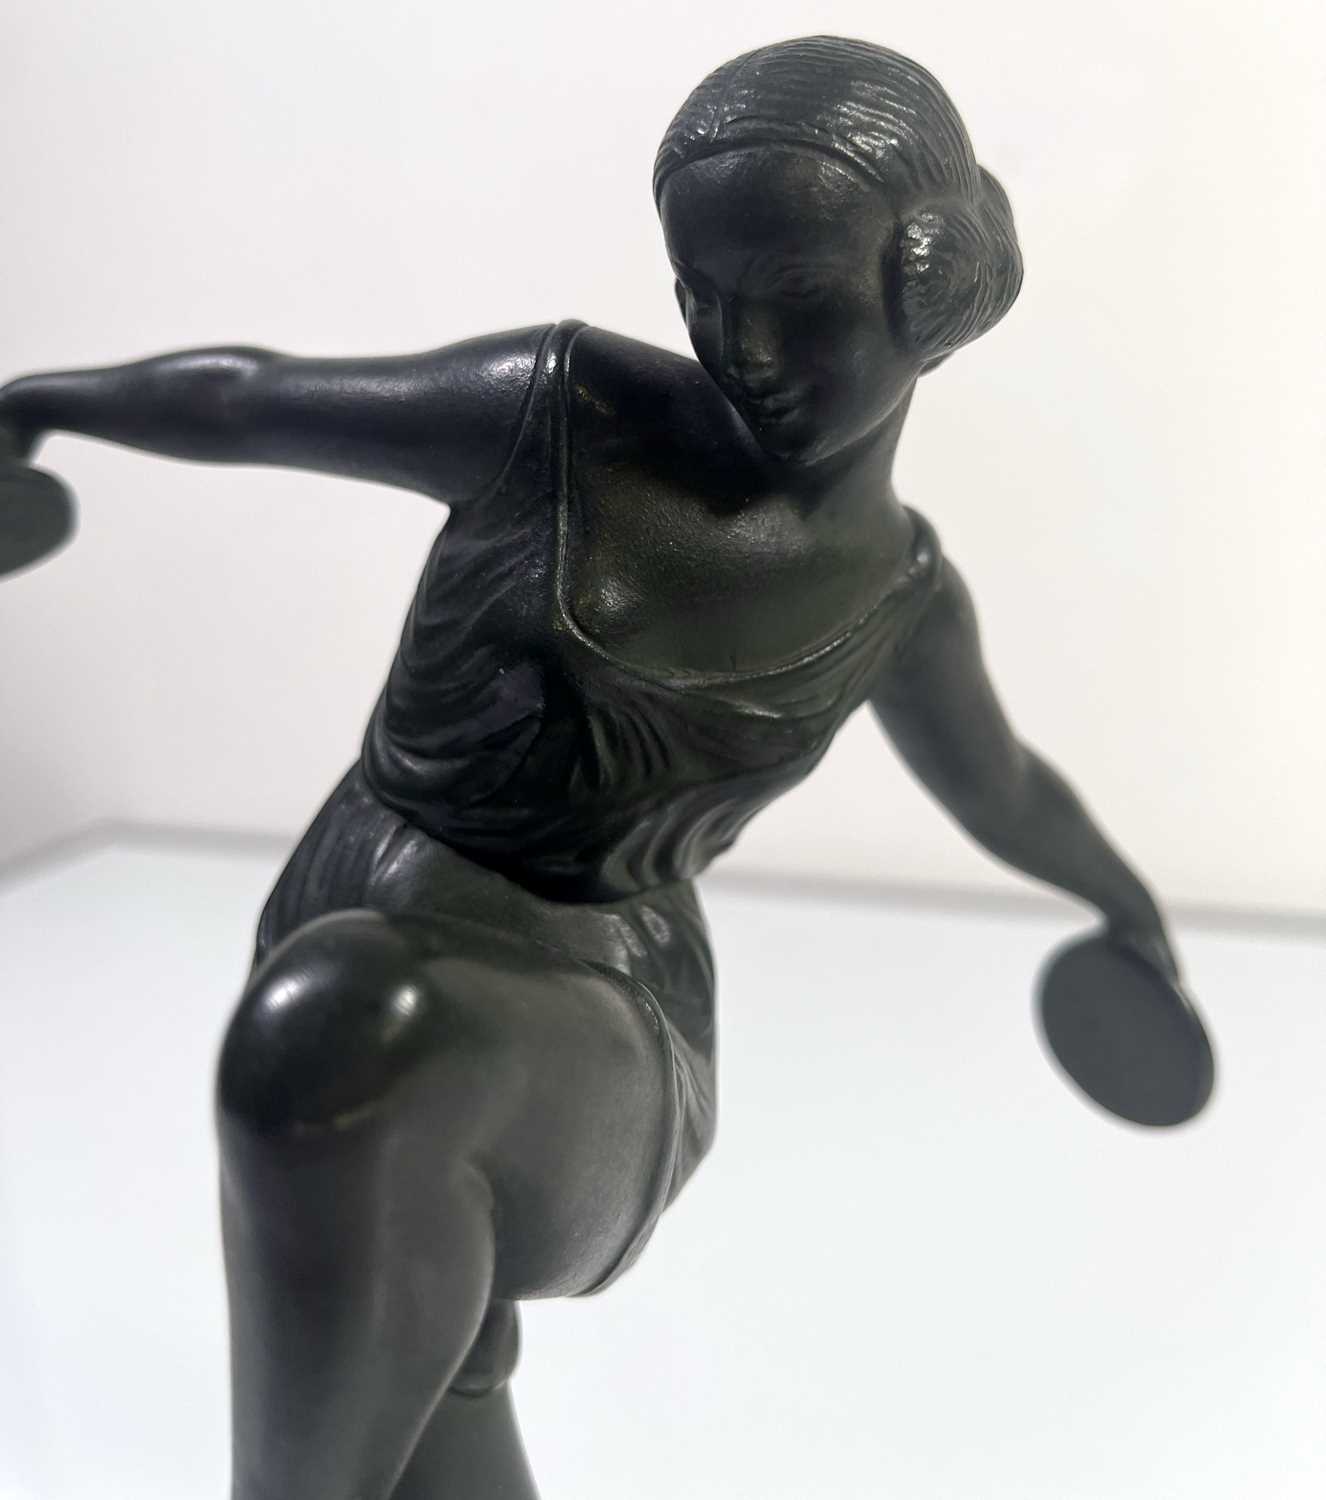 ART DECO FIGURE BY FAVRAL. - Image 3 of 5